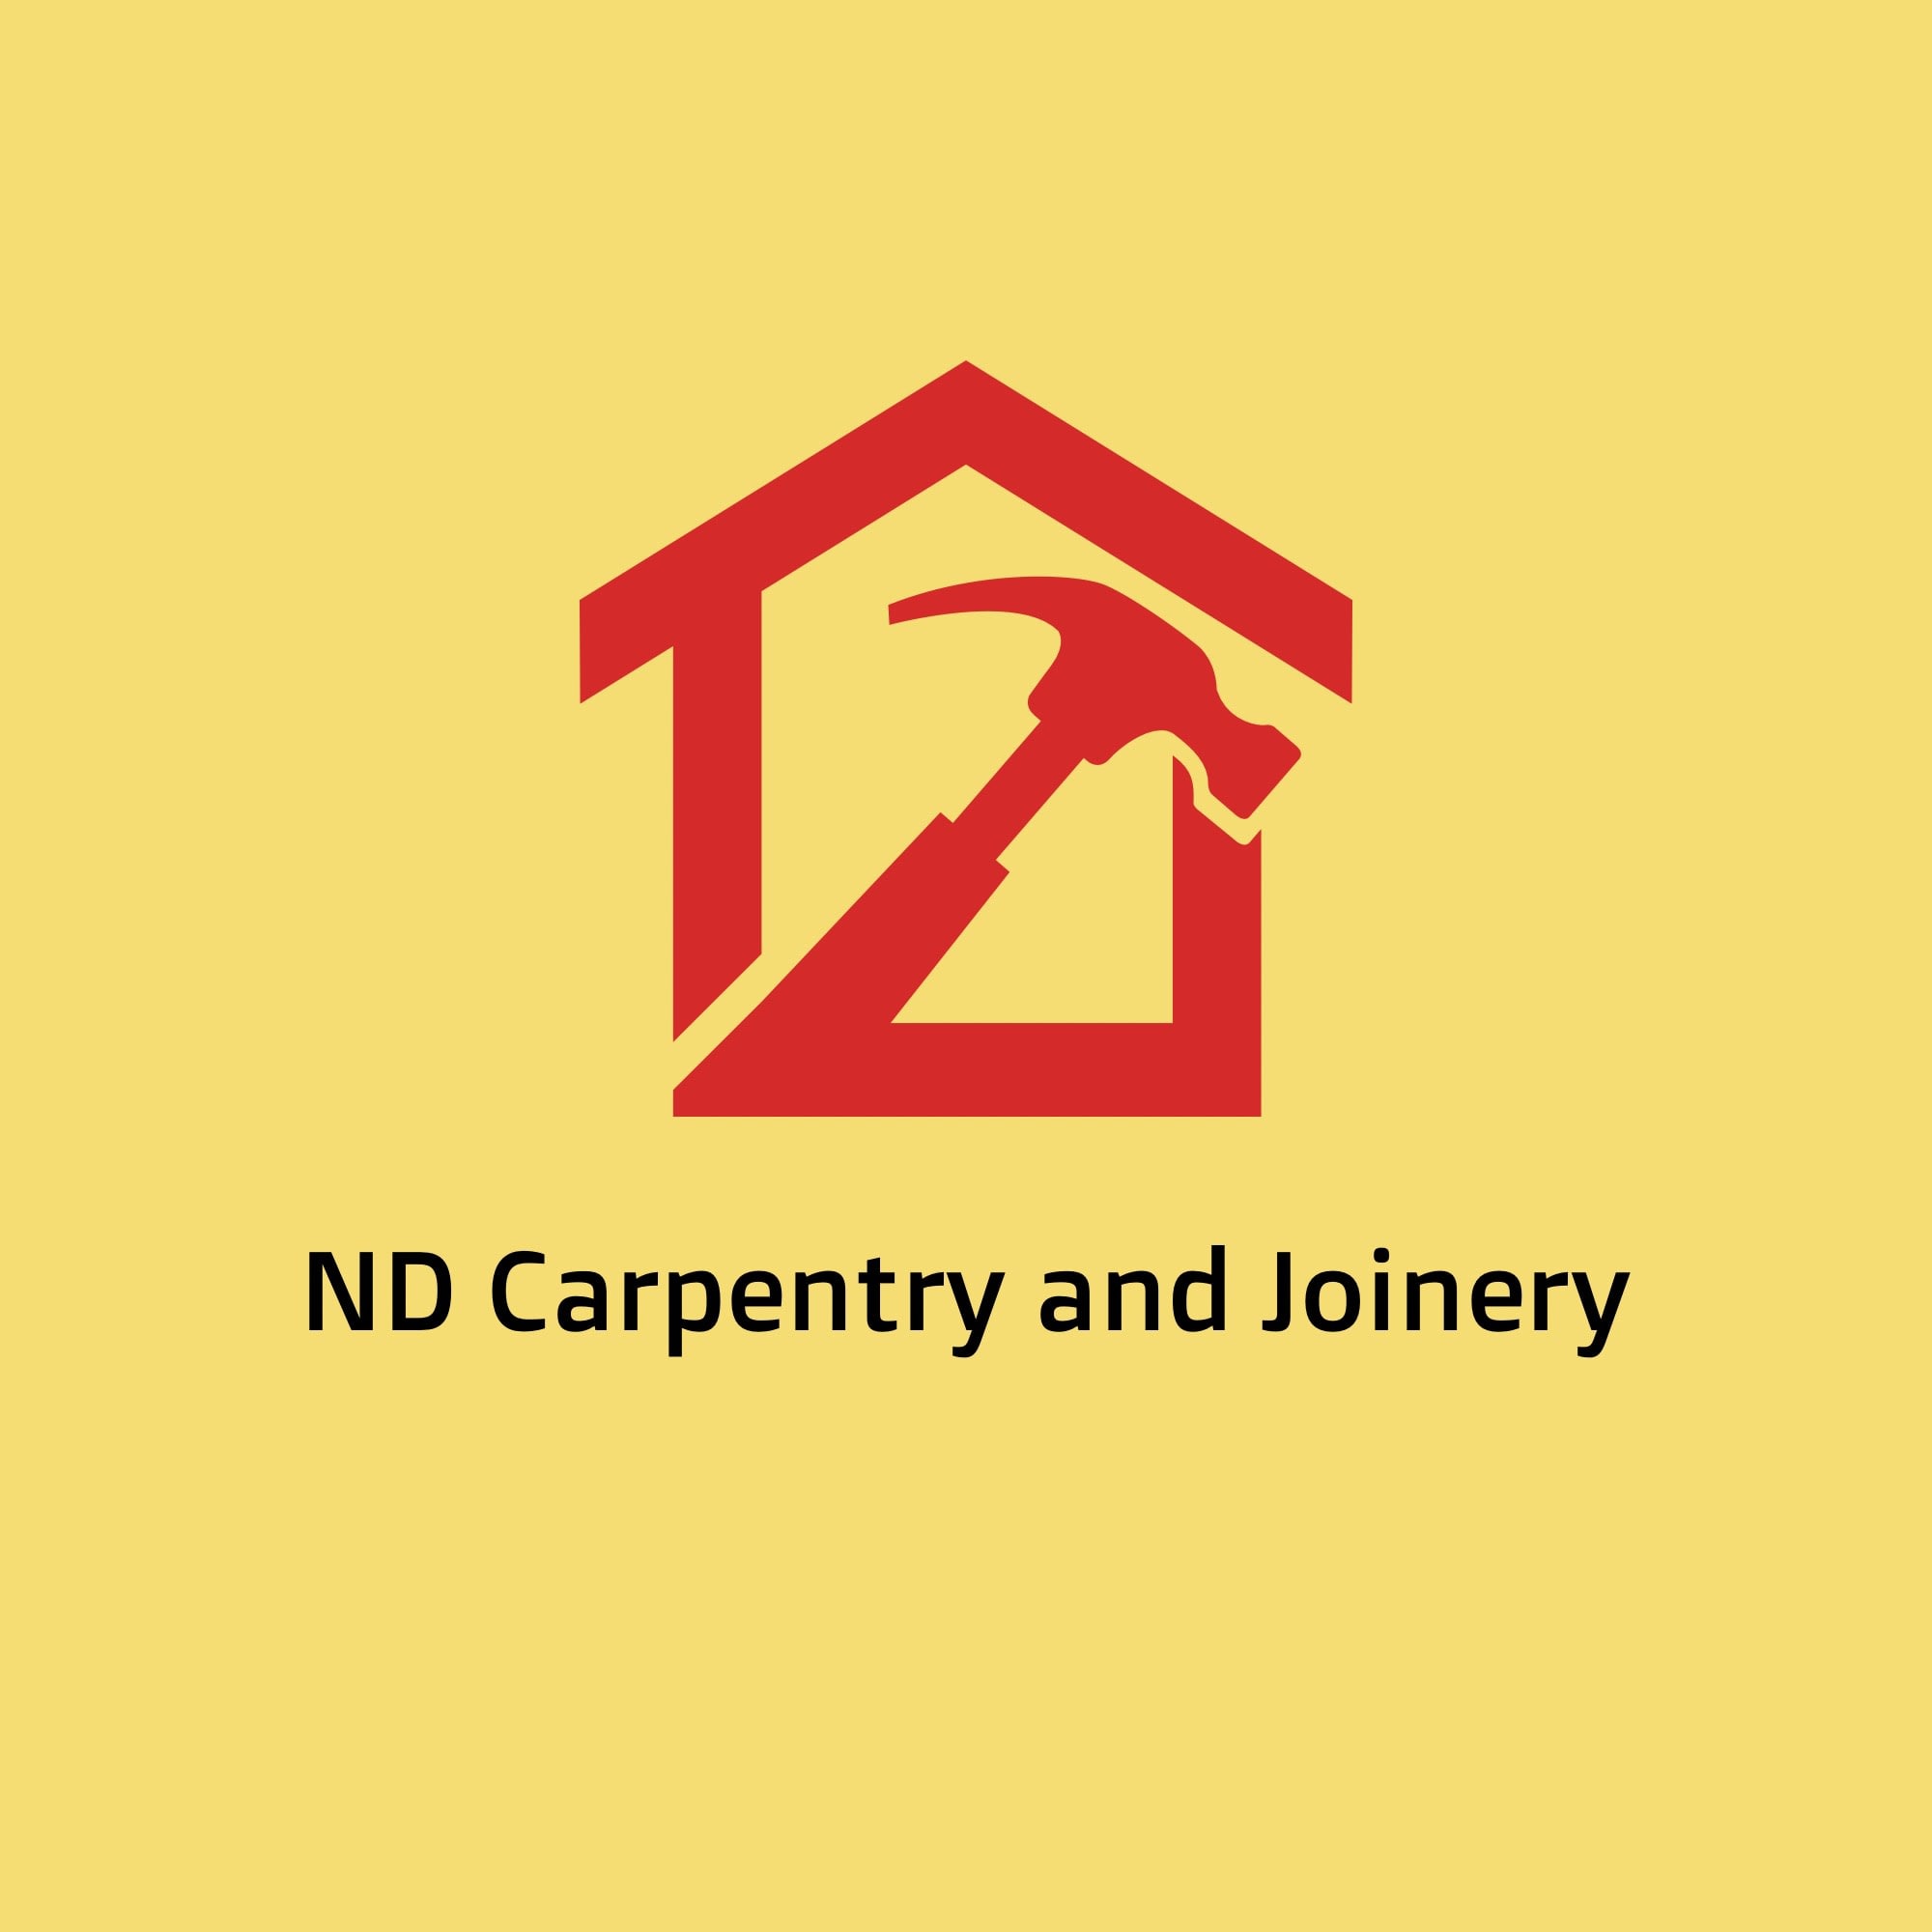 ND Carpentry And Joinery